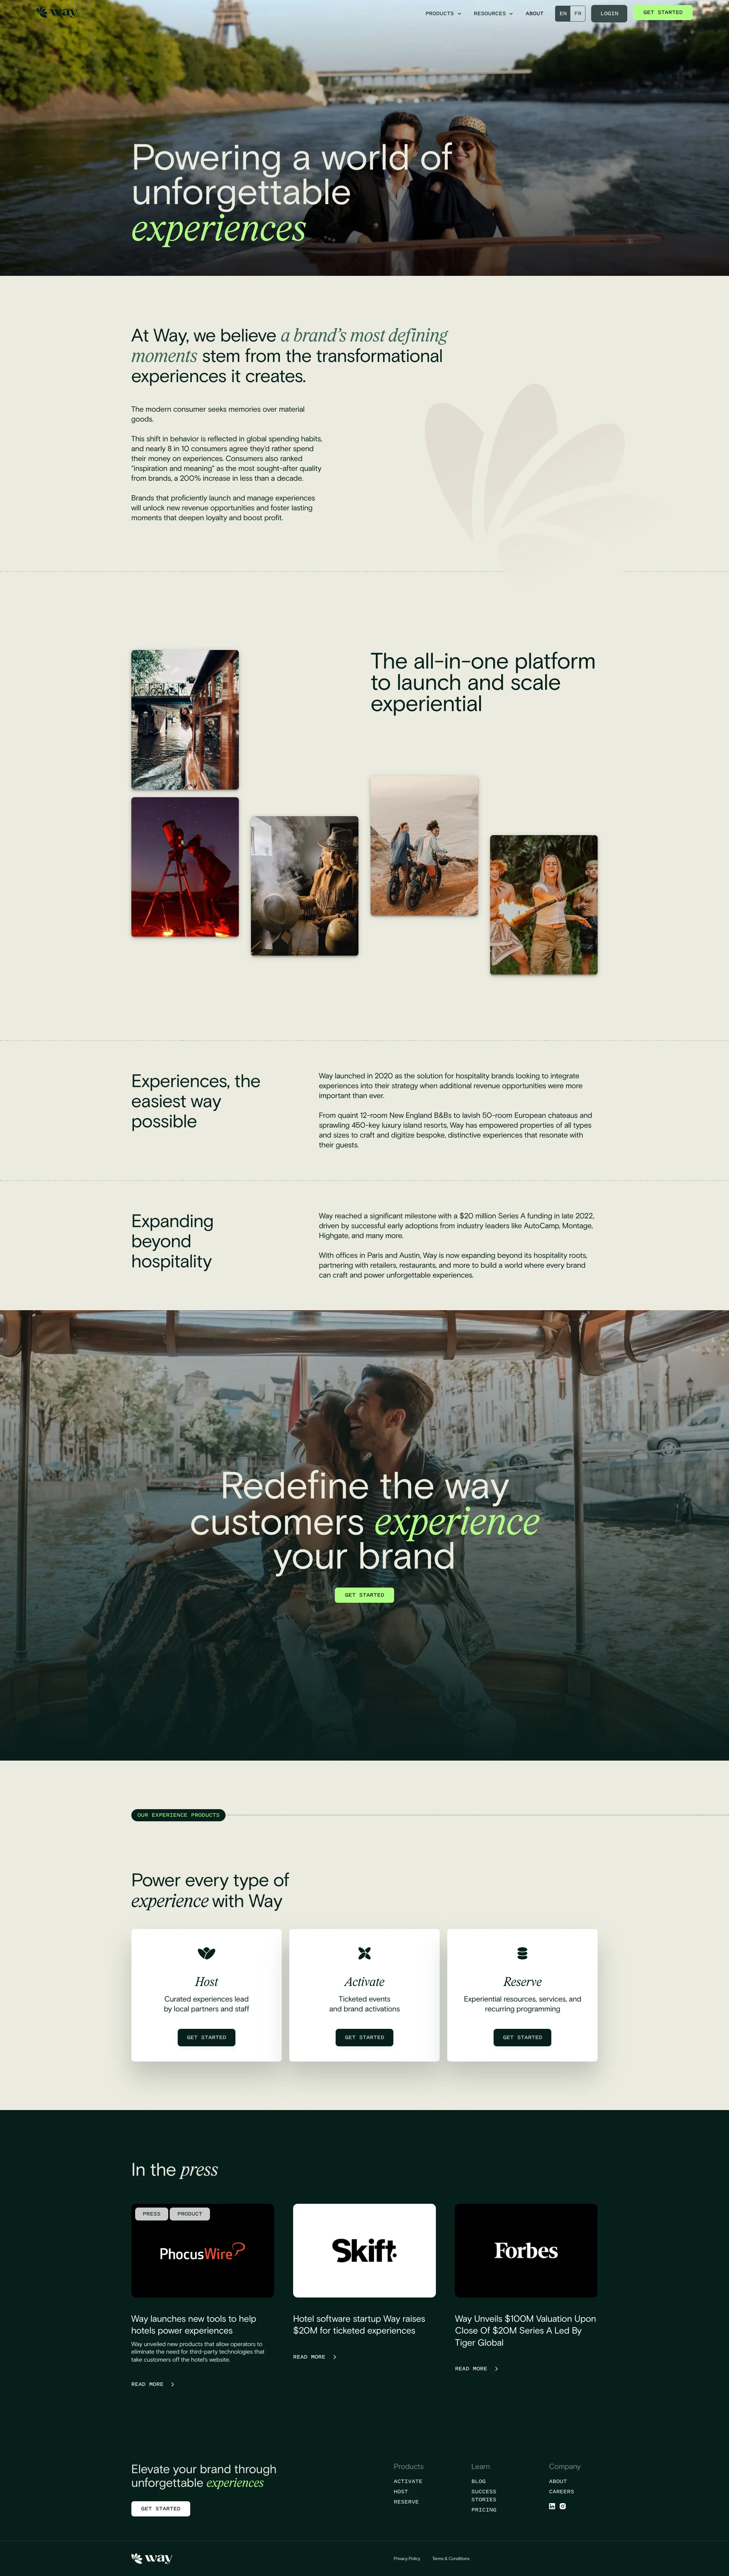 Way Landing Page Example: Unlock the extraordinary power of experiences. Elevate the way people interact with your brand. Launch and scale experiential with Way.